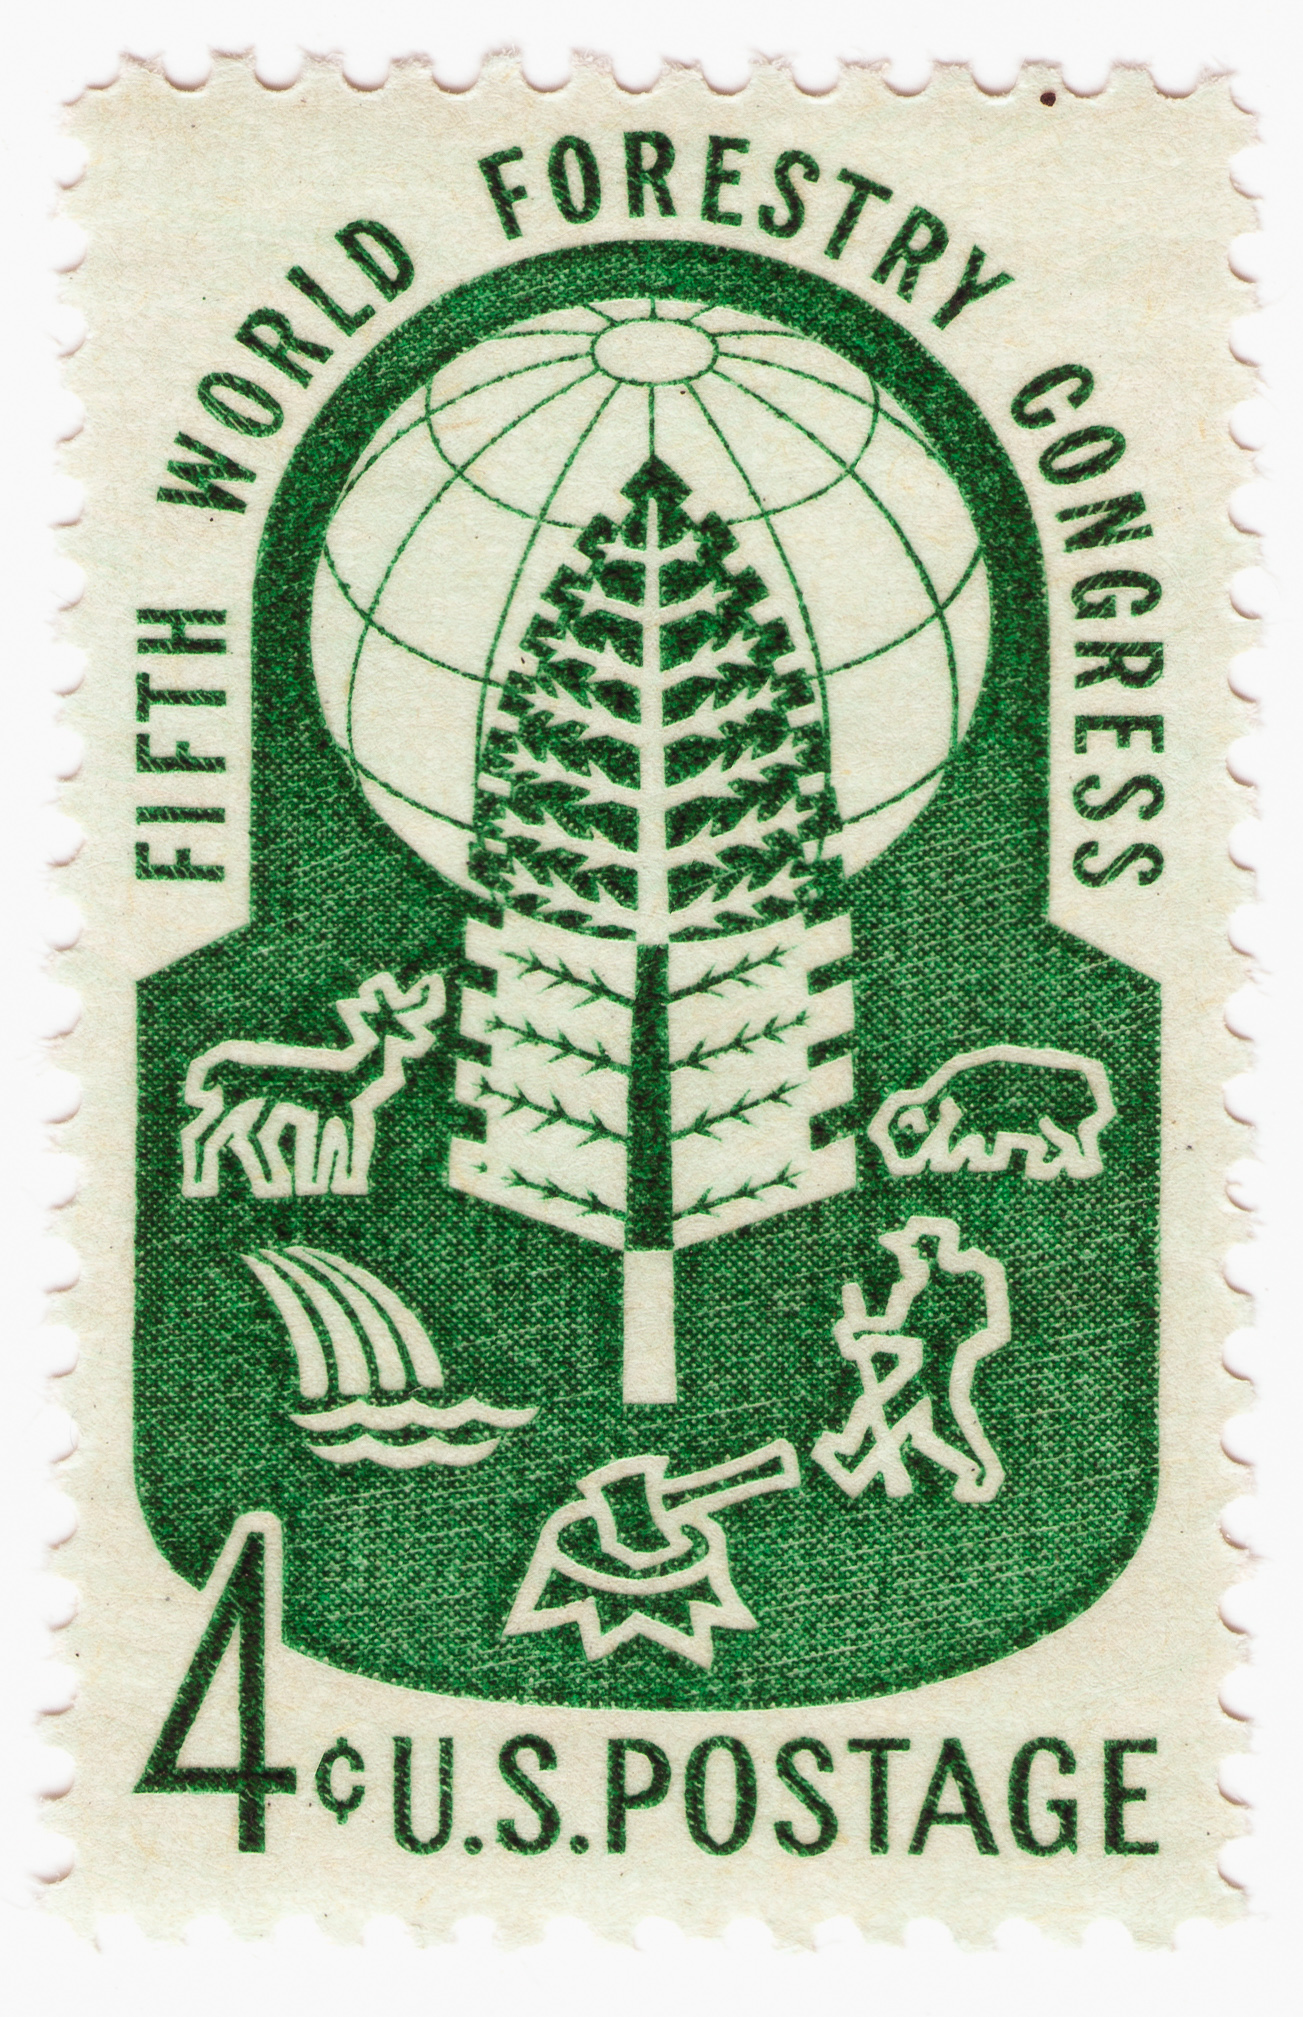 5th World Forestry Congress (1960)